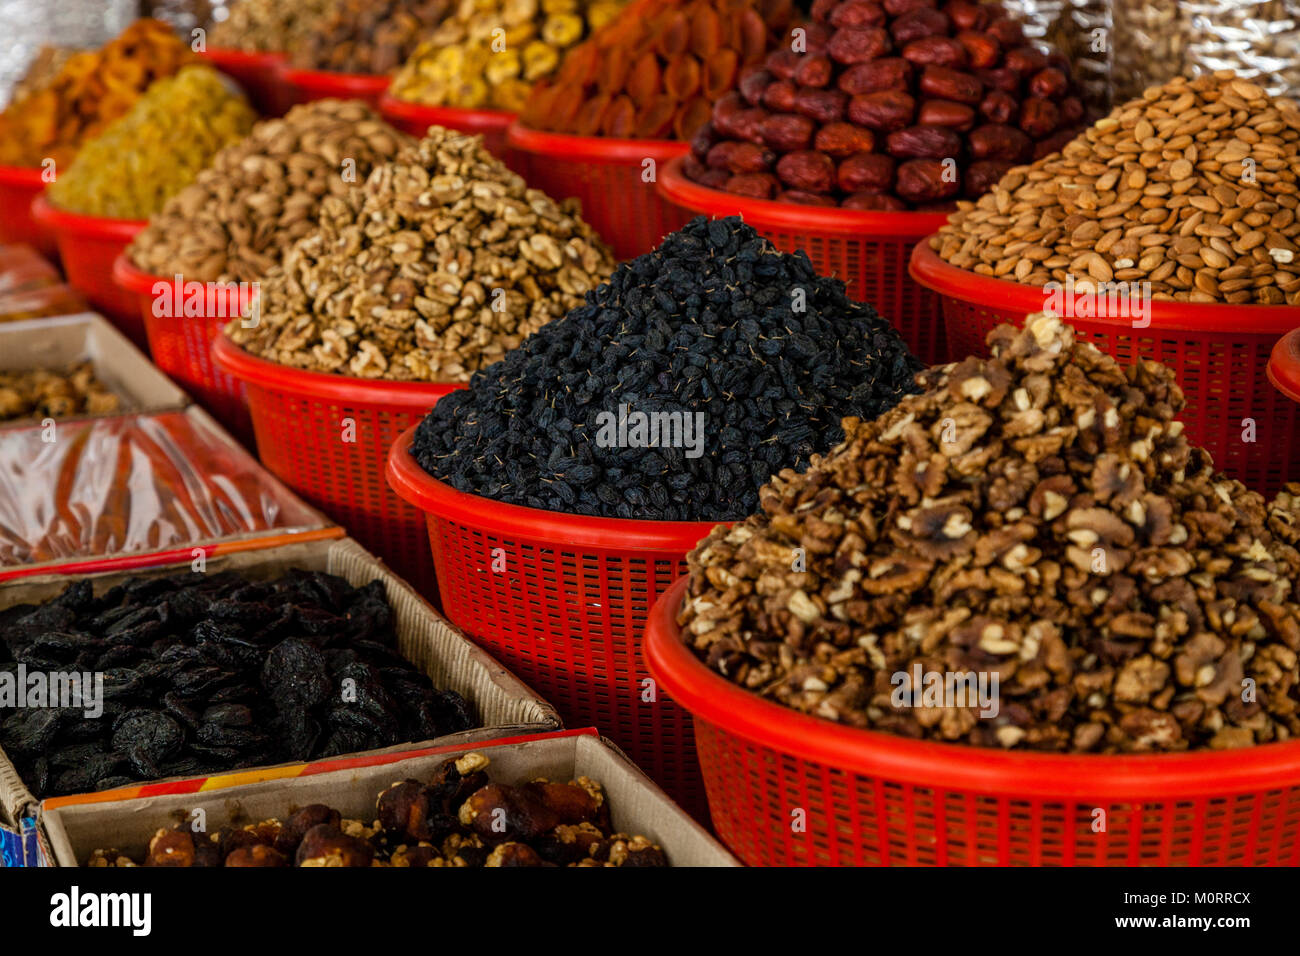 Dried Fruit and Nuts For Sale At The Main Bazaar, Samarkand, Uzbekistan Stock Photo